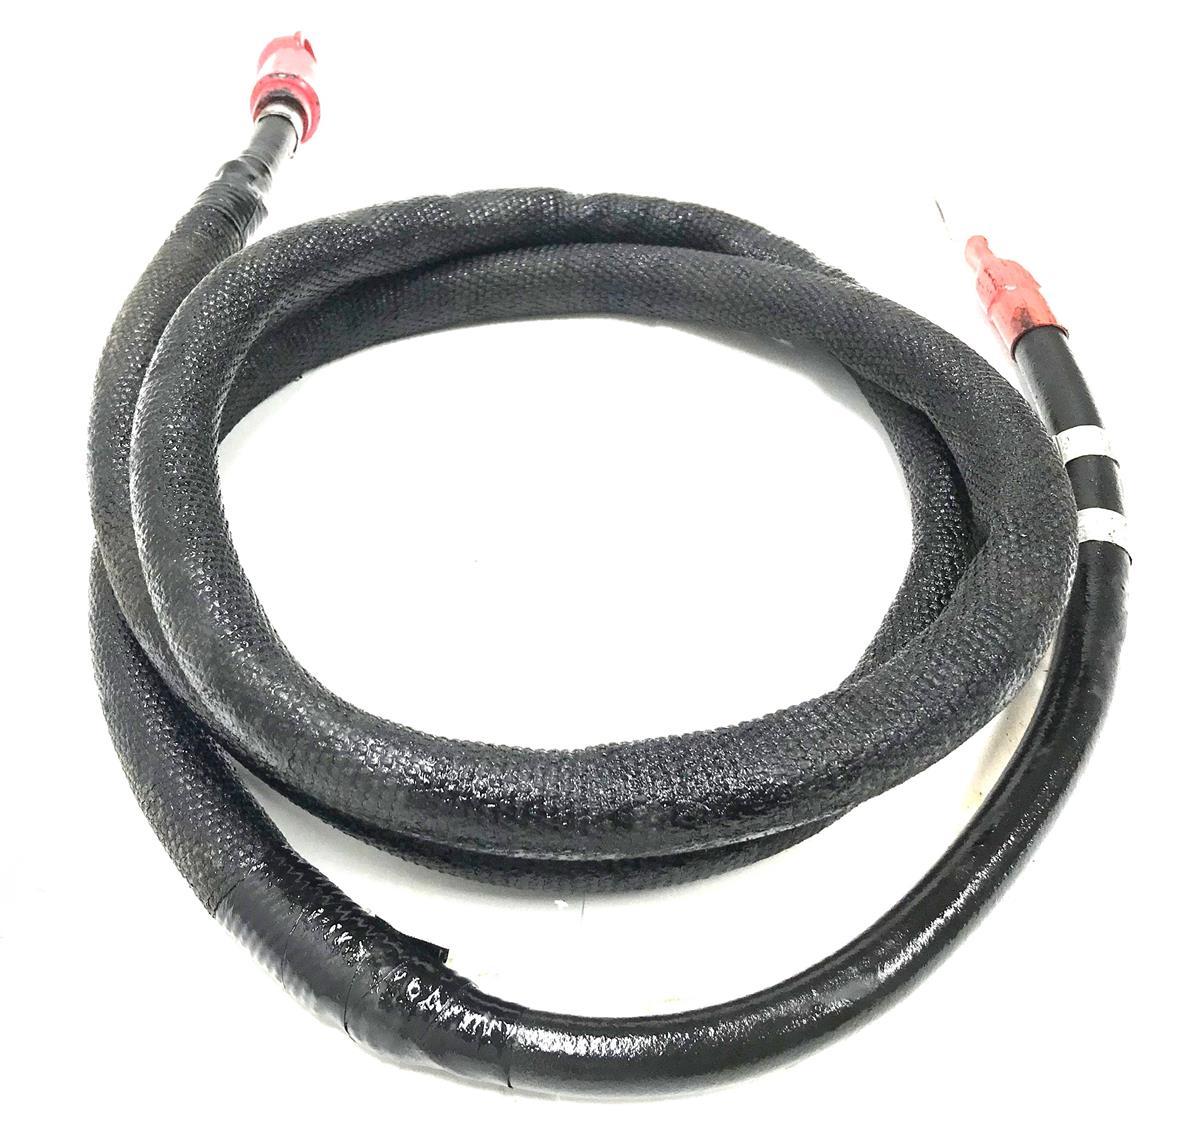 HM-1343 | HM-1343  100-200 AMP Dual Voltage Alternator Wiring Harness Electrical Lead Cable HMMWV (3).jpg